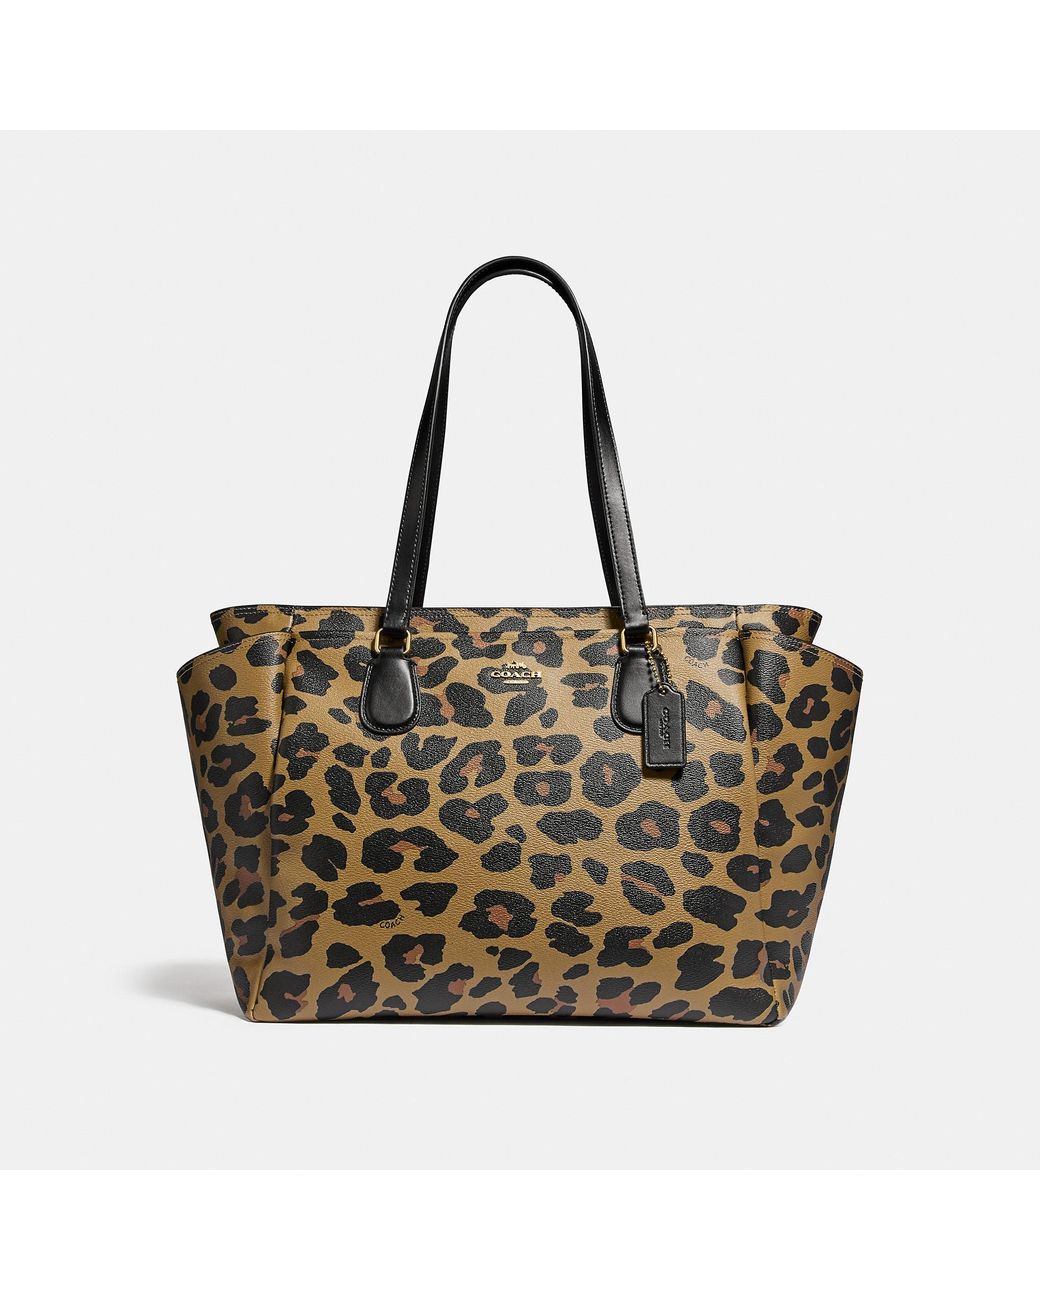 COACH Baby Bag With Leopard Print | Lyst